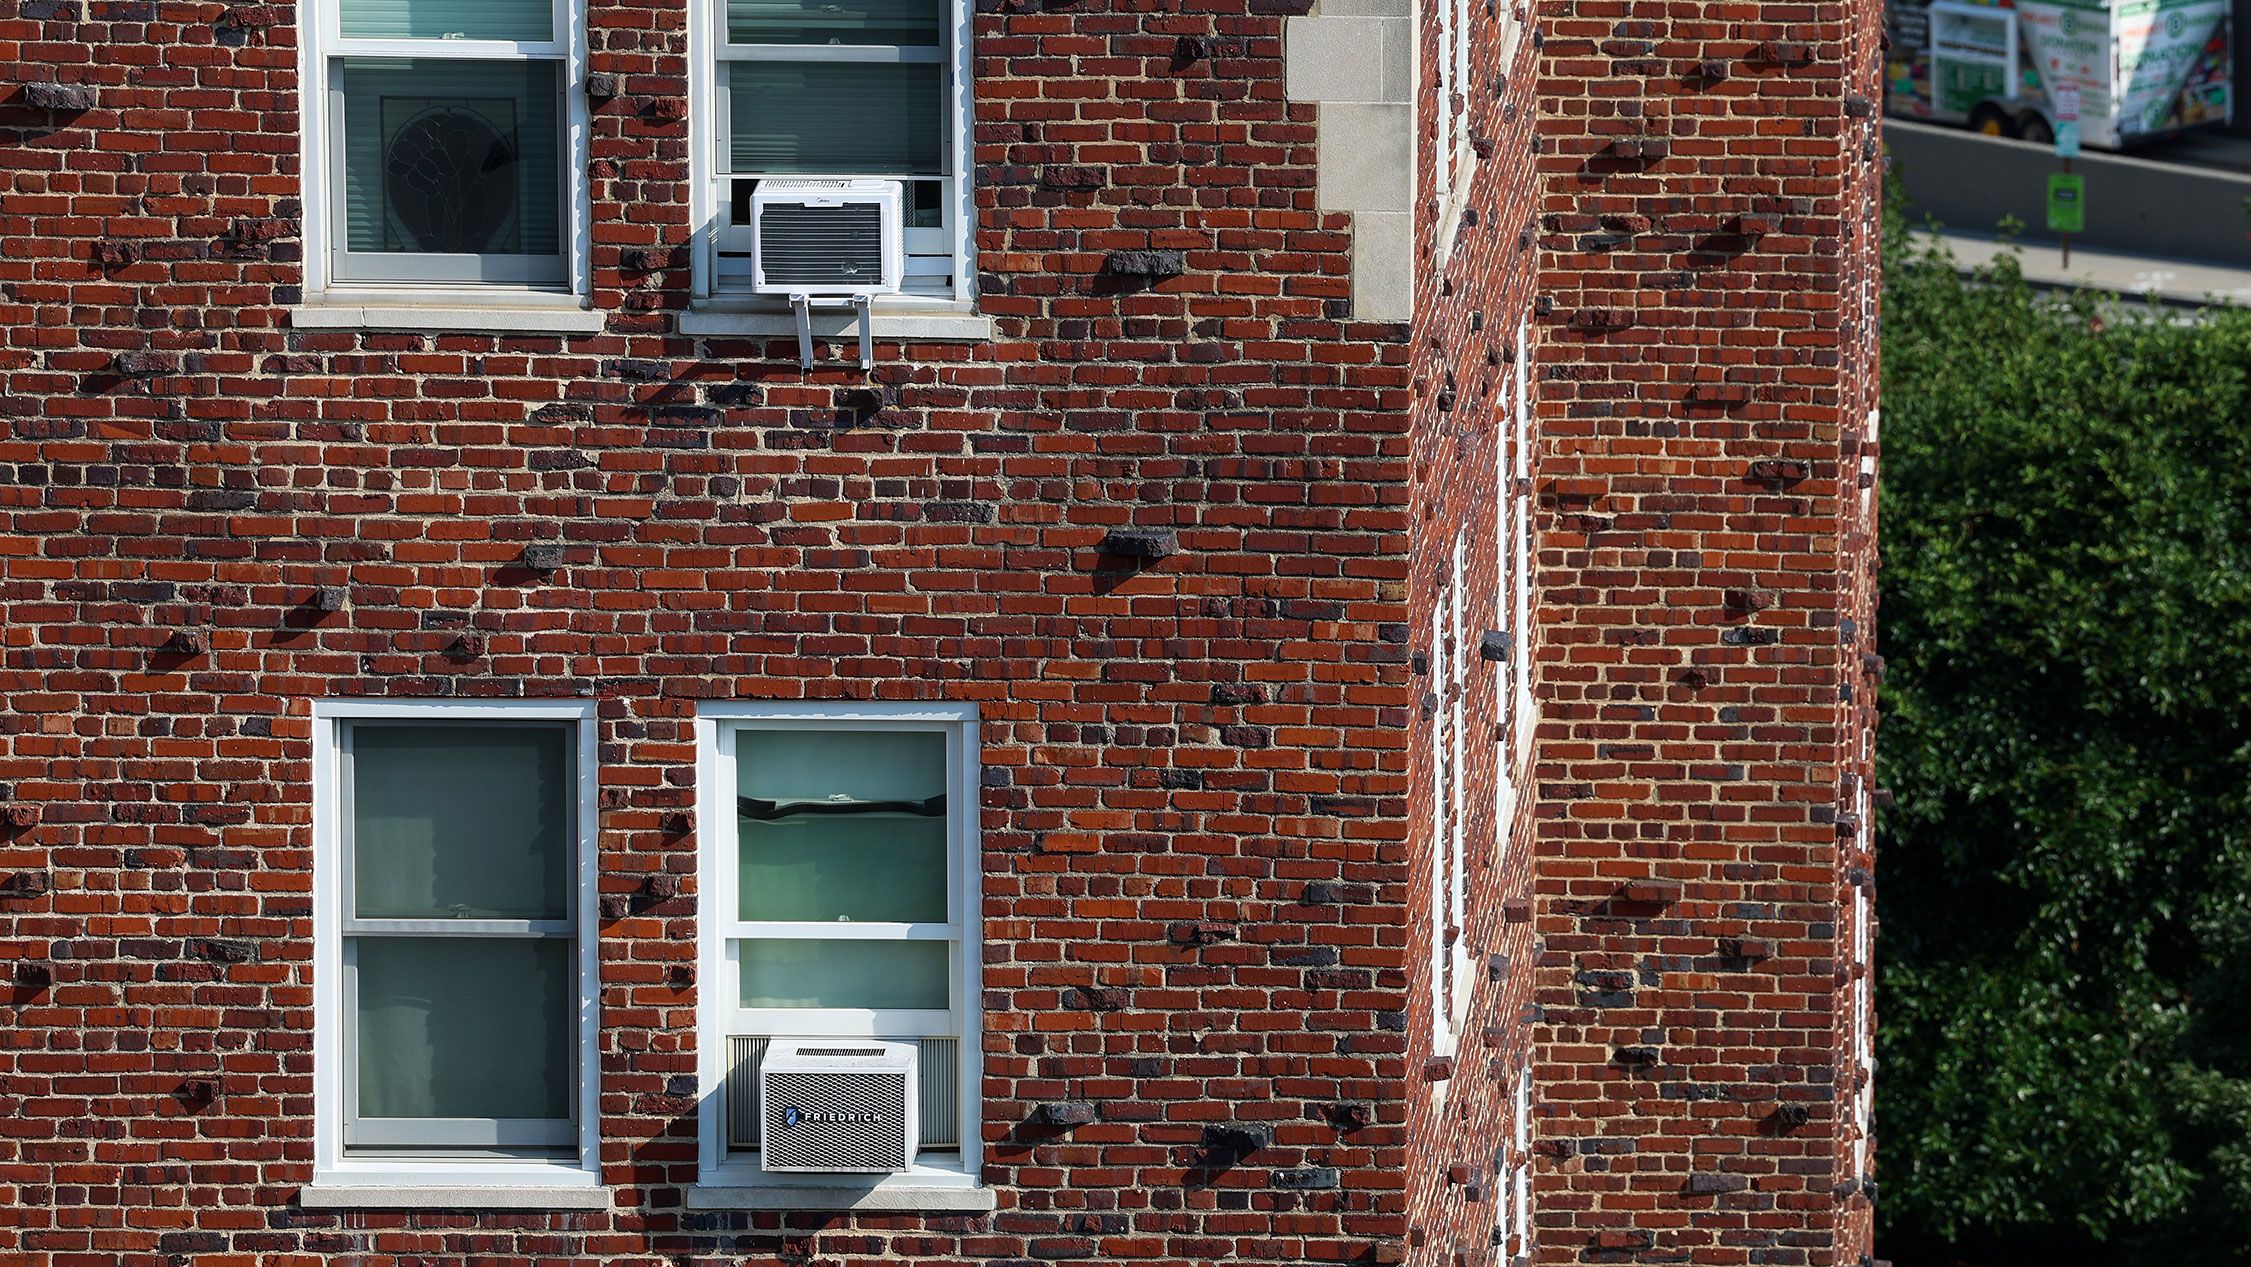 Heat waves are getting longer and more brutal. Here’s why your AC can’t save you anymore | CNN